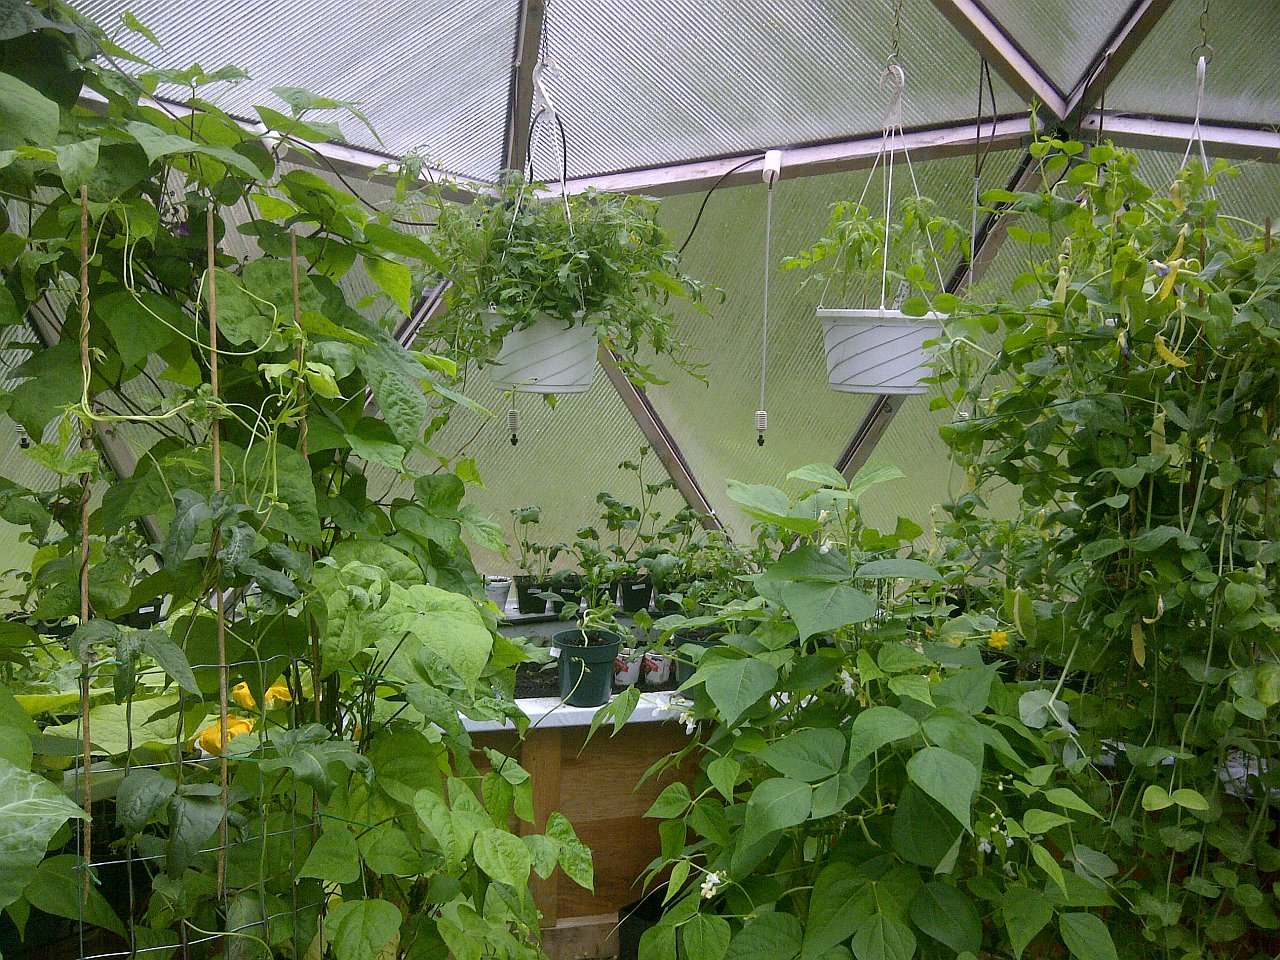 Alex's Geodesic Dome Greenhouse: May 2013